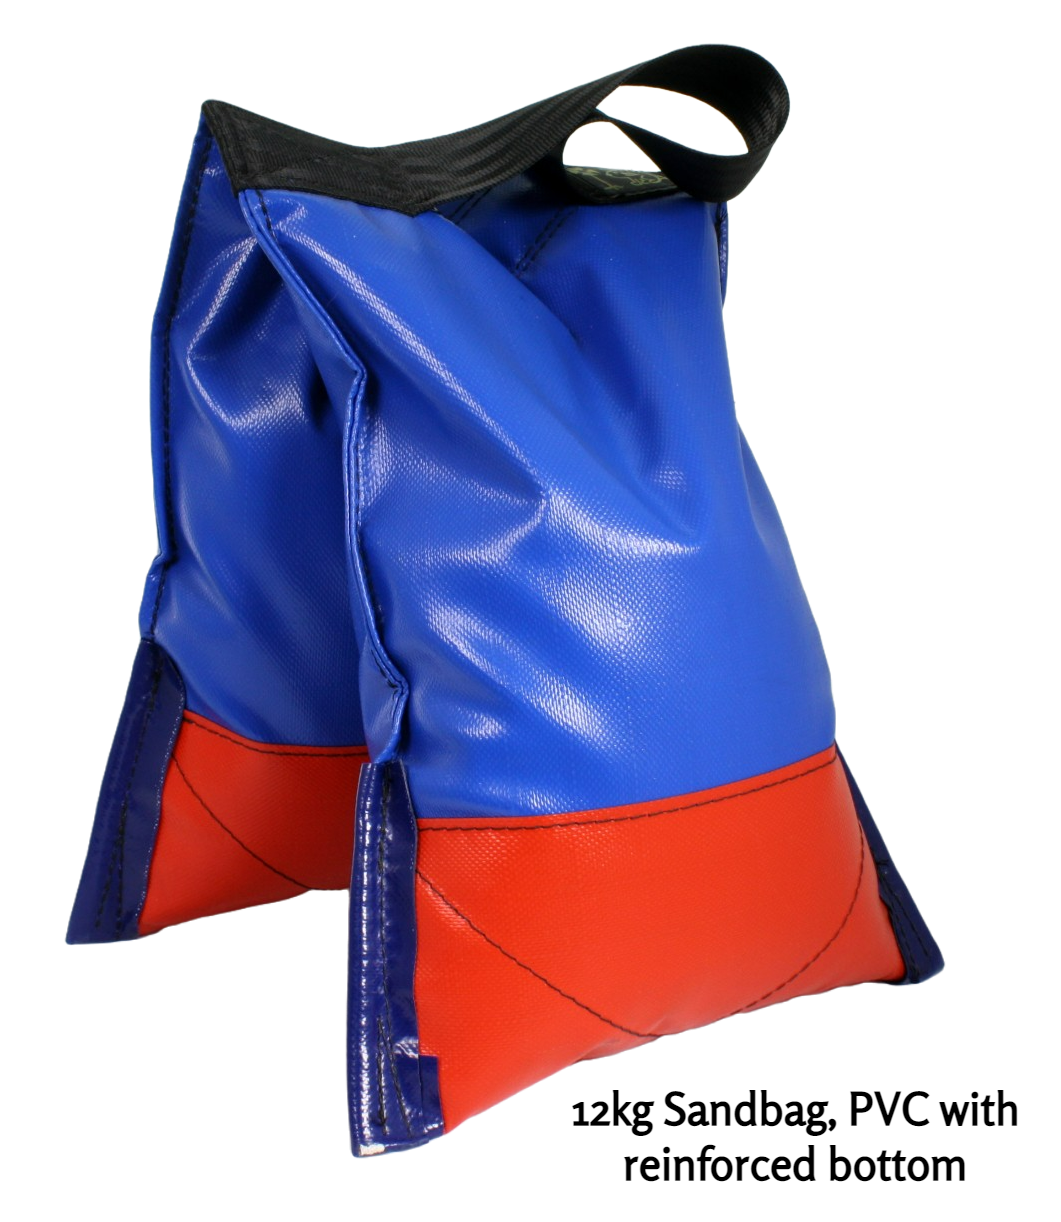 12kg sandbag with reinforced bottom in blue and red PVC